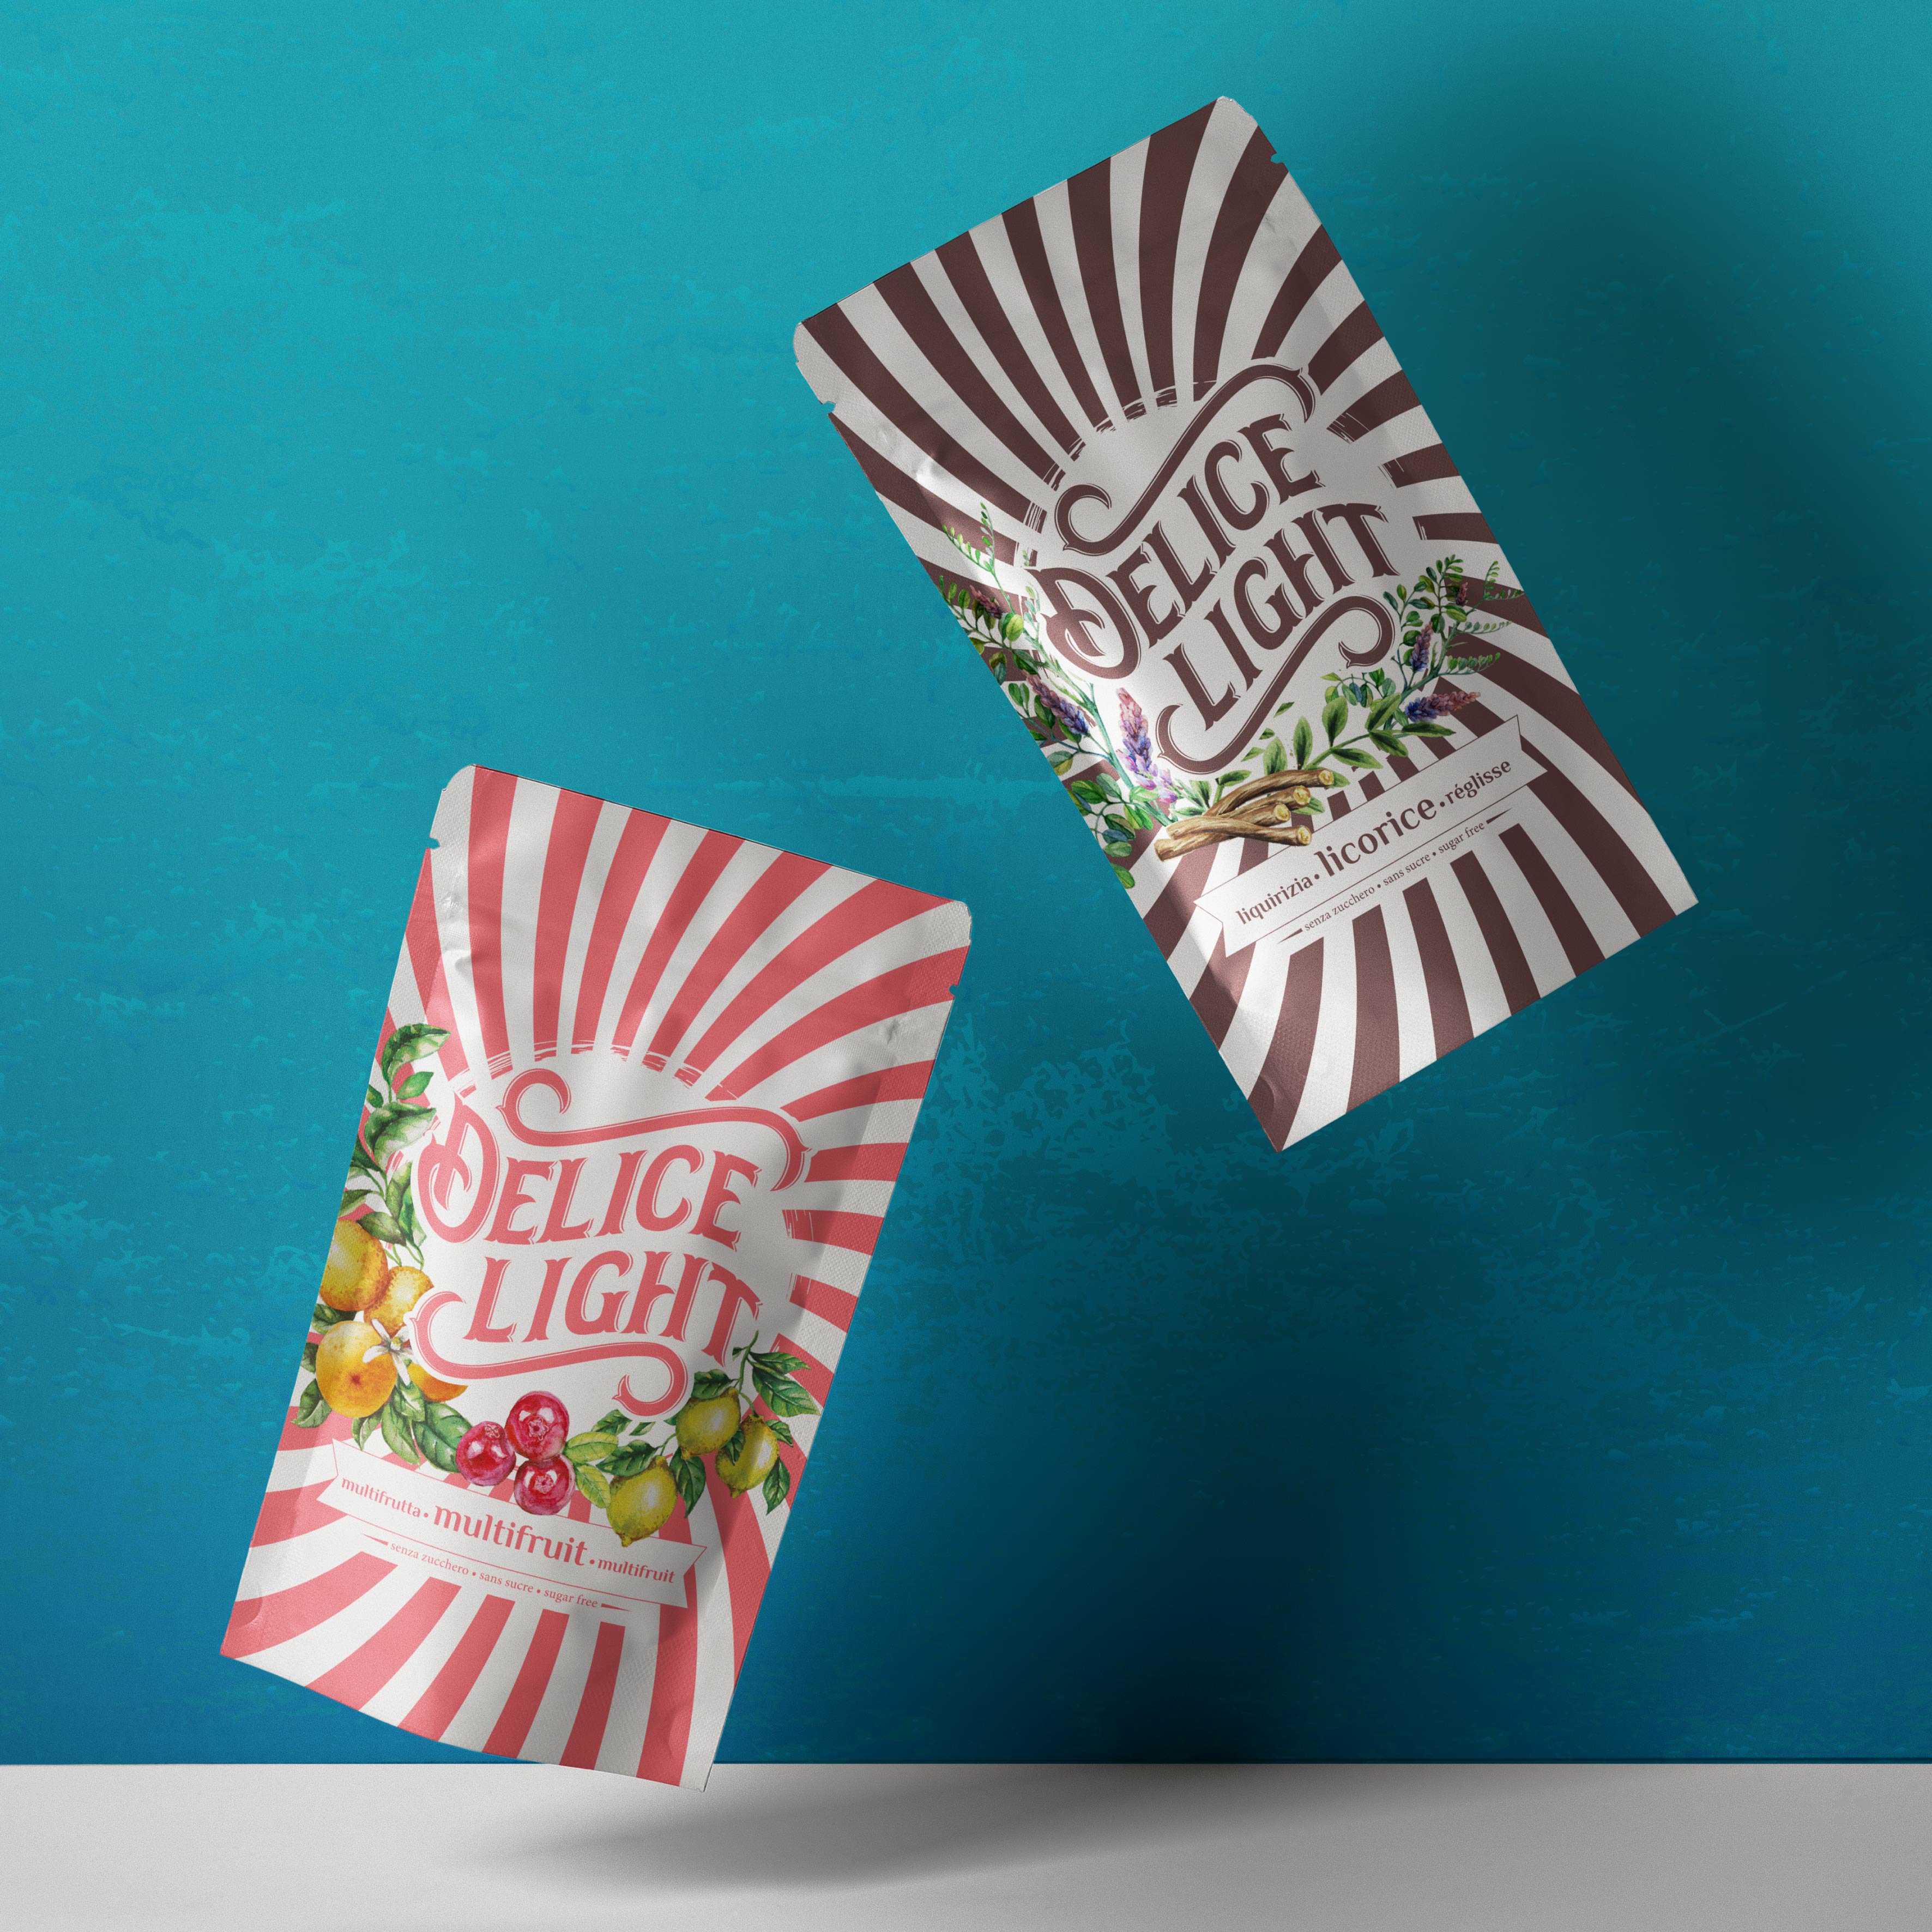 Creates New Brand and New Packaging Design for candies